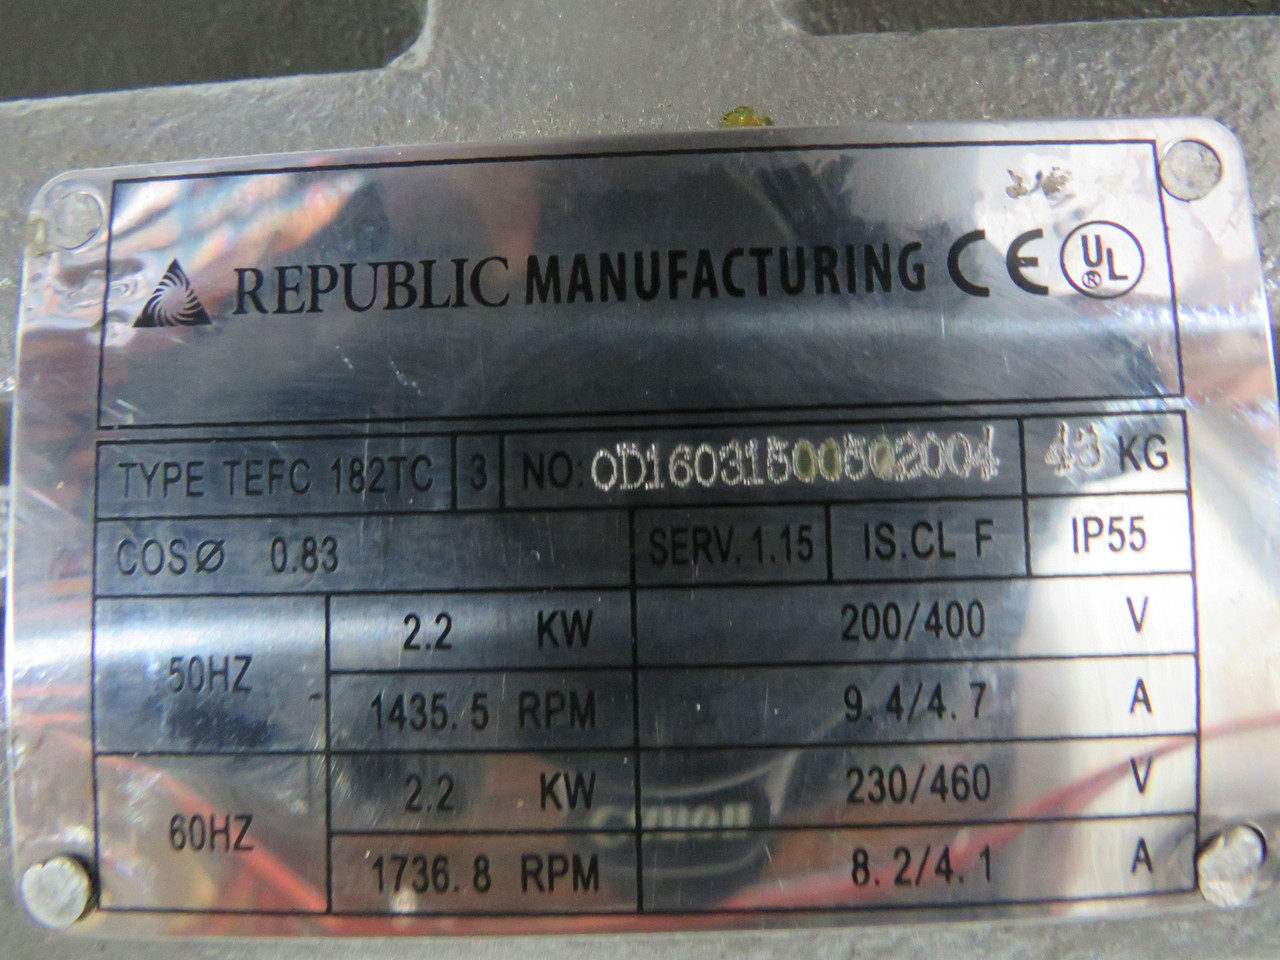 Republic Manufacturing 2.2kW 1435.5/1736.8RPM 200/400-230/460V USED